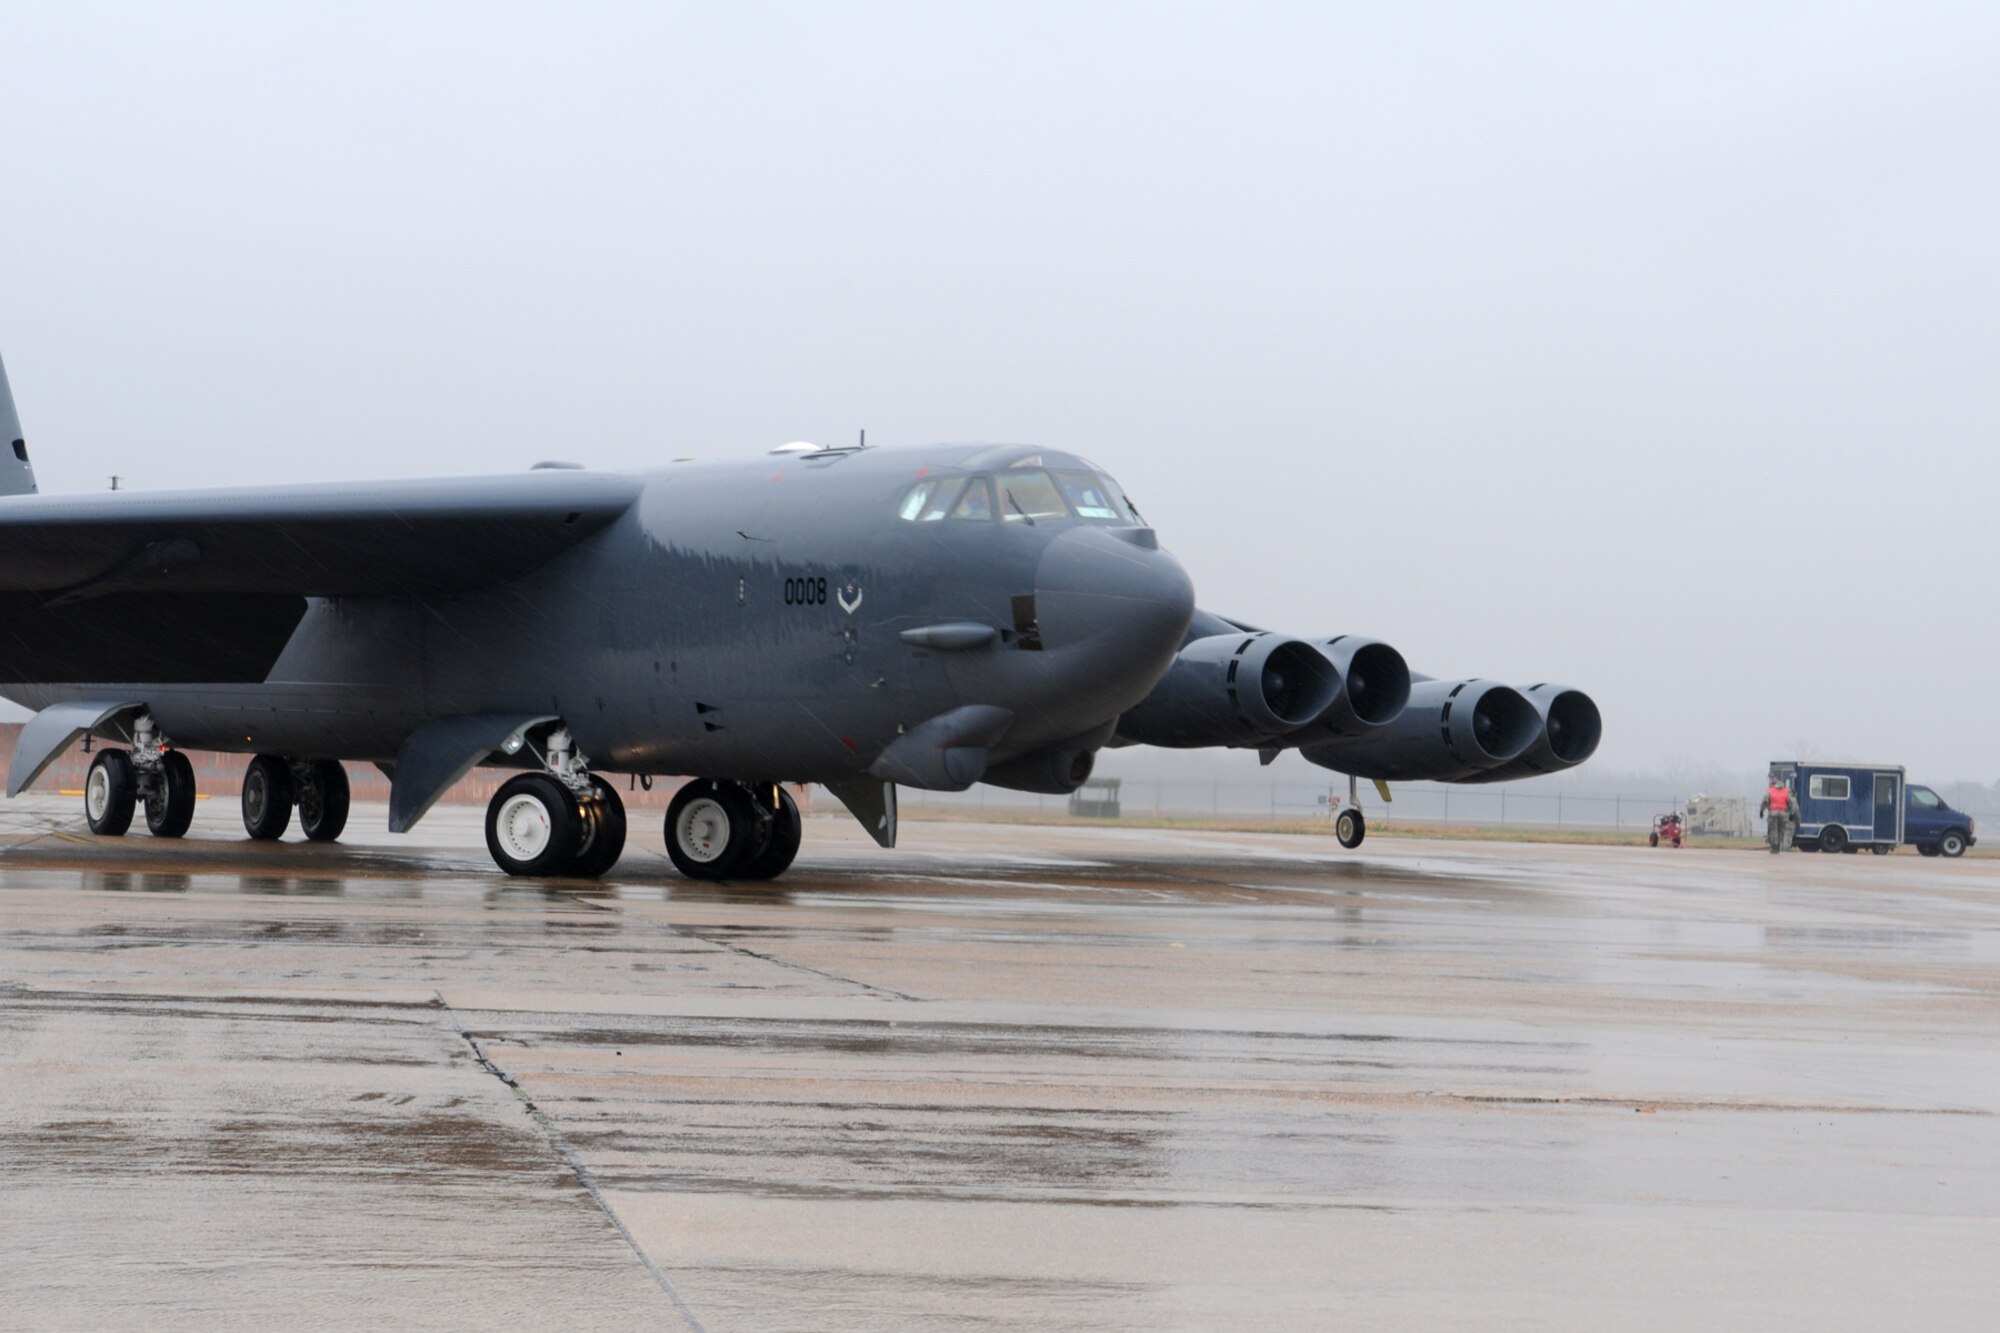 A 2nd Bomb Wing B-52H bomber, call sign Skull 61, taxis for takeoff at Barksdale Air Force Base, La, March 5, 2011. Aircraft 60-008, the 8th Air Force flag ship, was crewed by Air Force Reserve members of the 343rd Bomb Squadron, which is a classic associate unit assigned to the 2nd BW. The launch of this crew and aircraft was significant for being the first supported by 2nd BW operations and maintenance personnel during a 307th Bomb Wing Reserve Unit Training Assembly. (U. S. Air Force Photo/Master Sgt. Greg Steele)